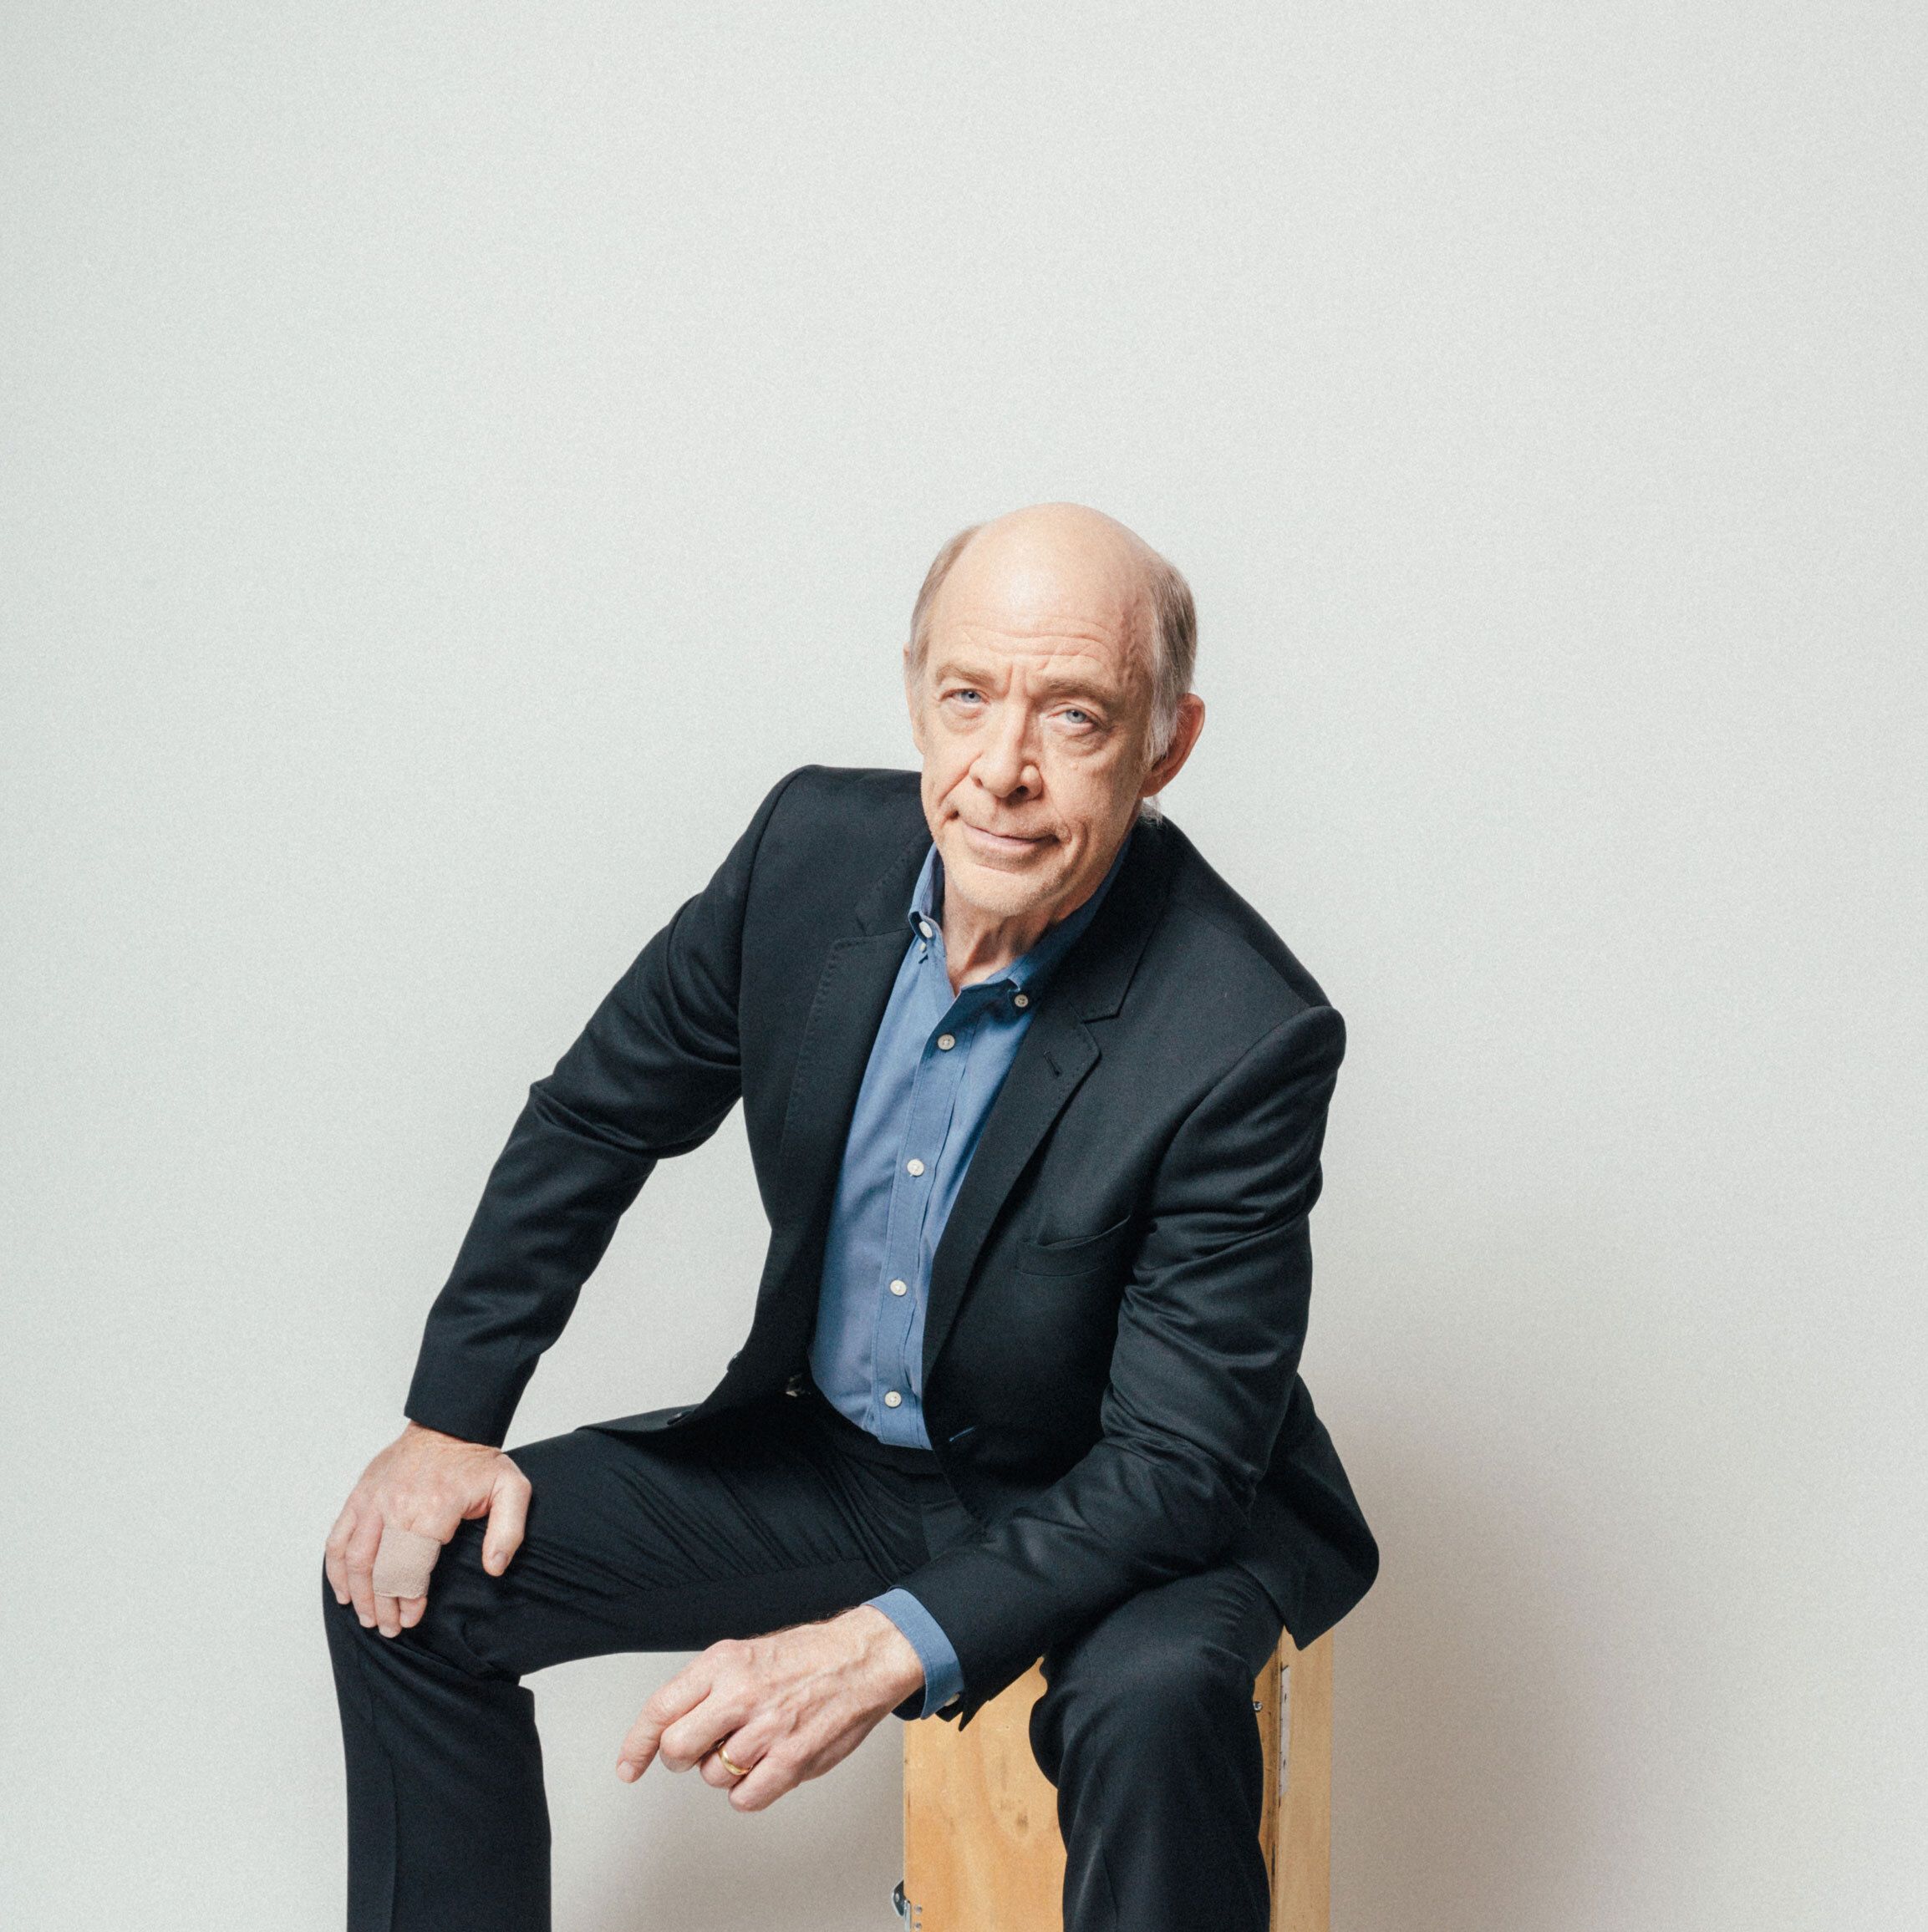 J.K. Simmons Played the Long Game, and Won